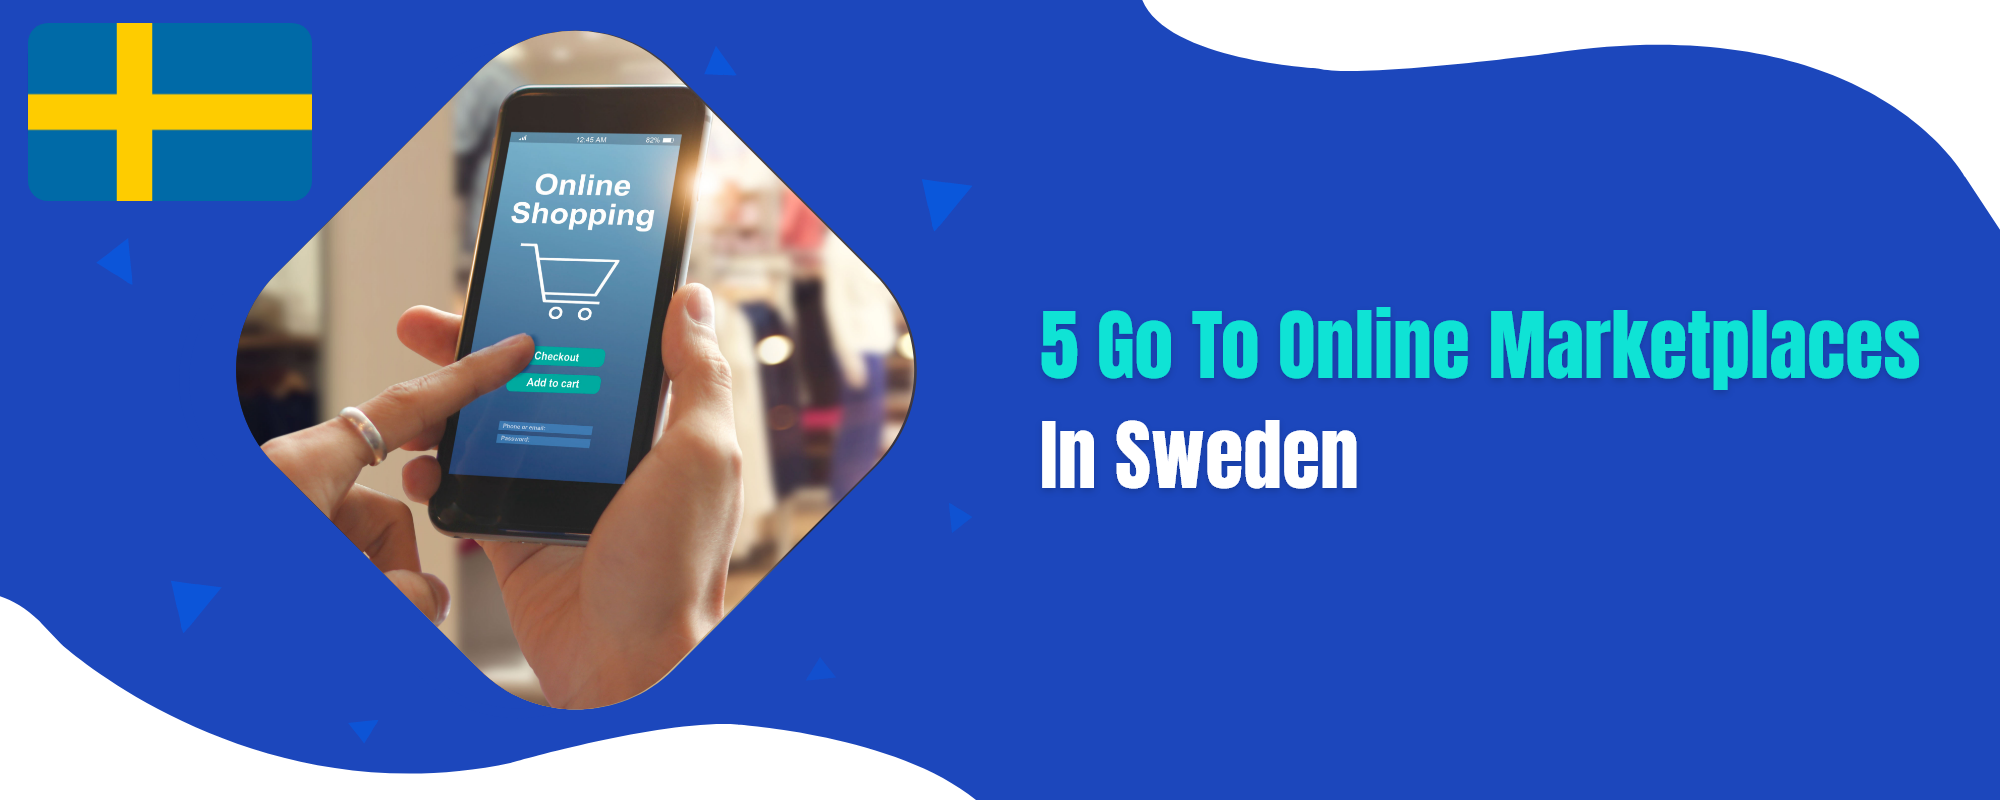 Ecommerce marketplaces in Sweden